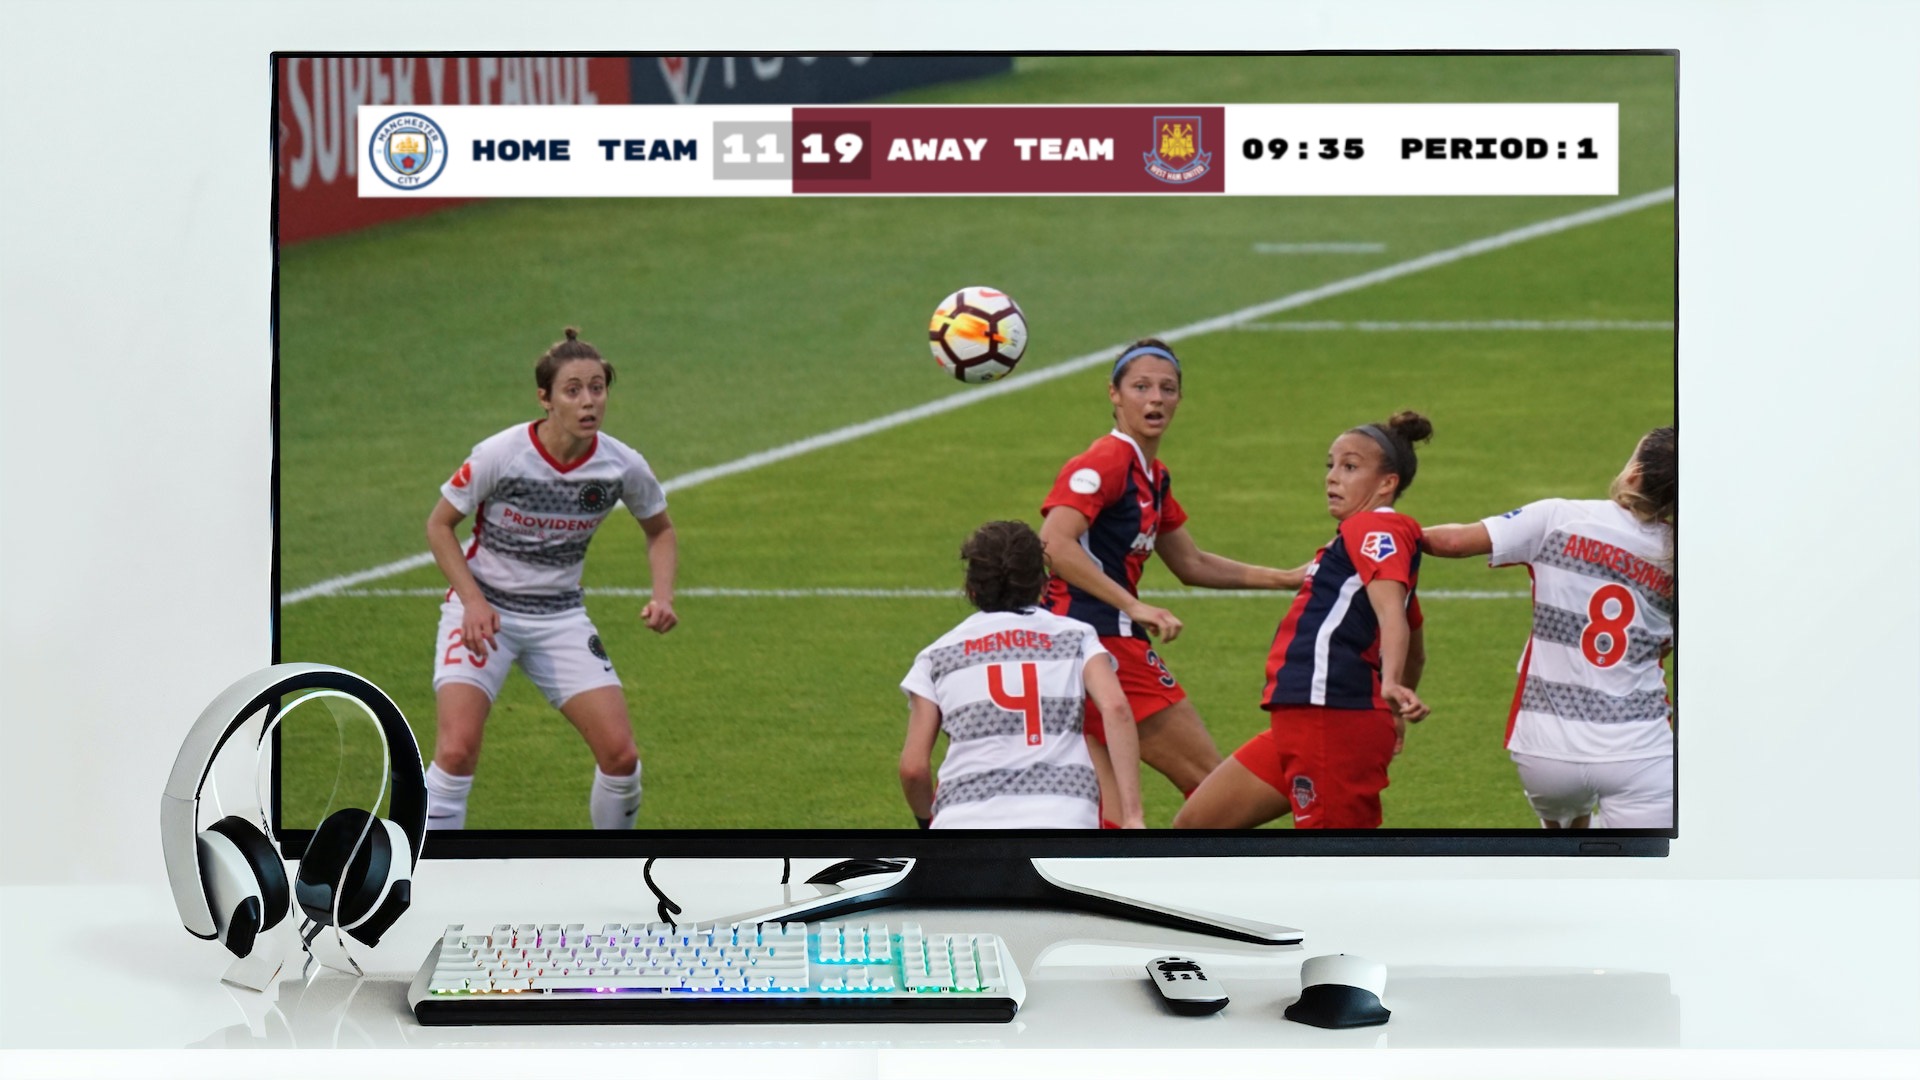 A soccer game being shown on a TV with a scoreboard overlay